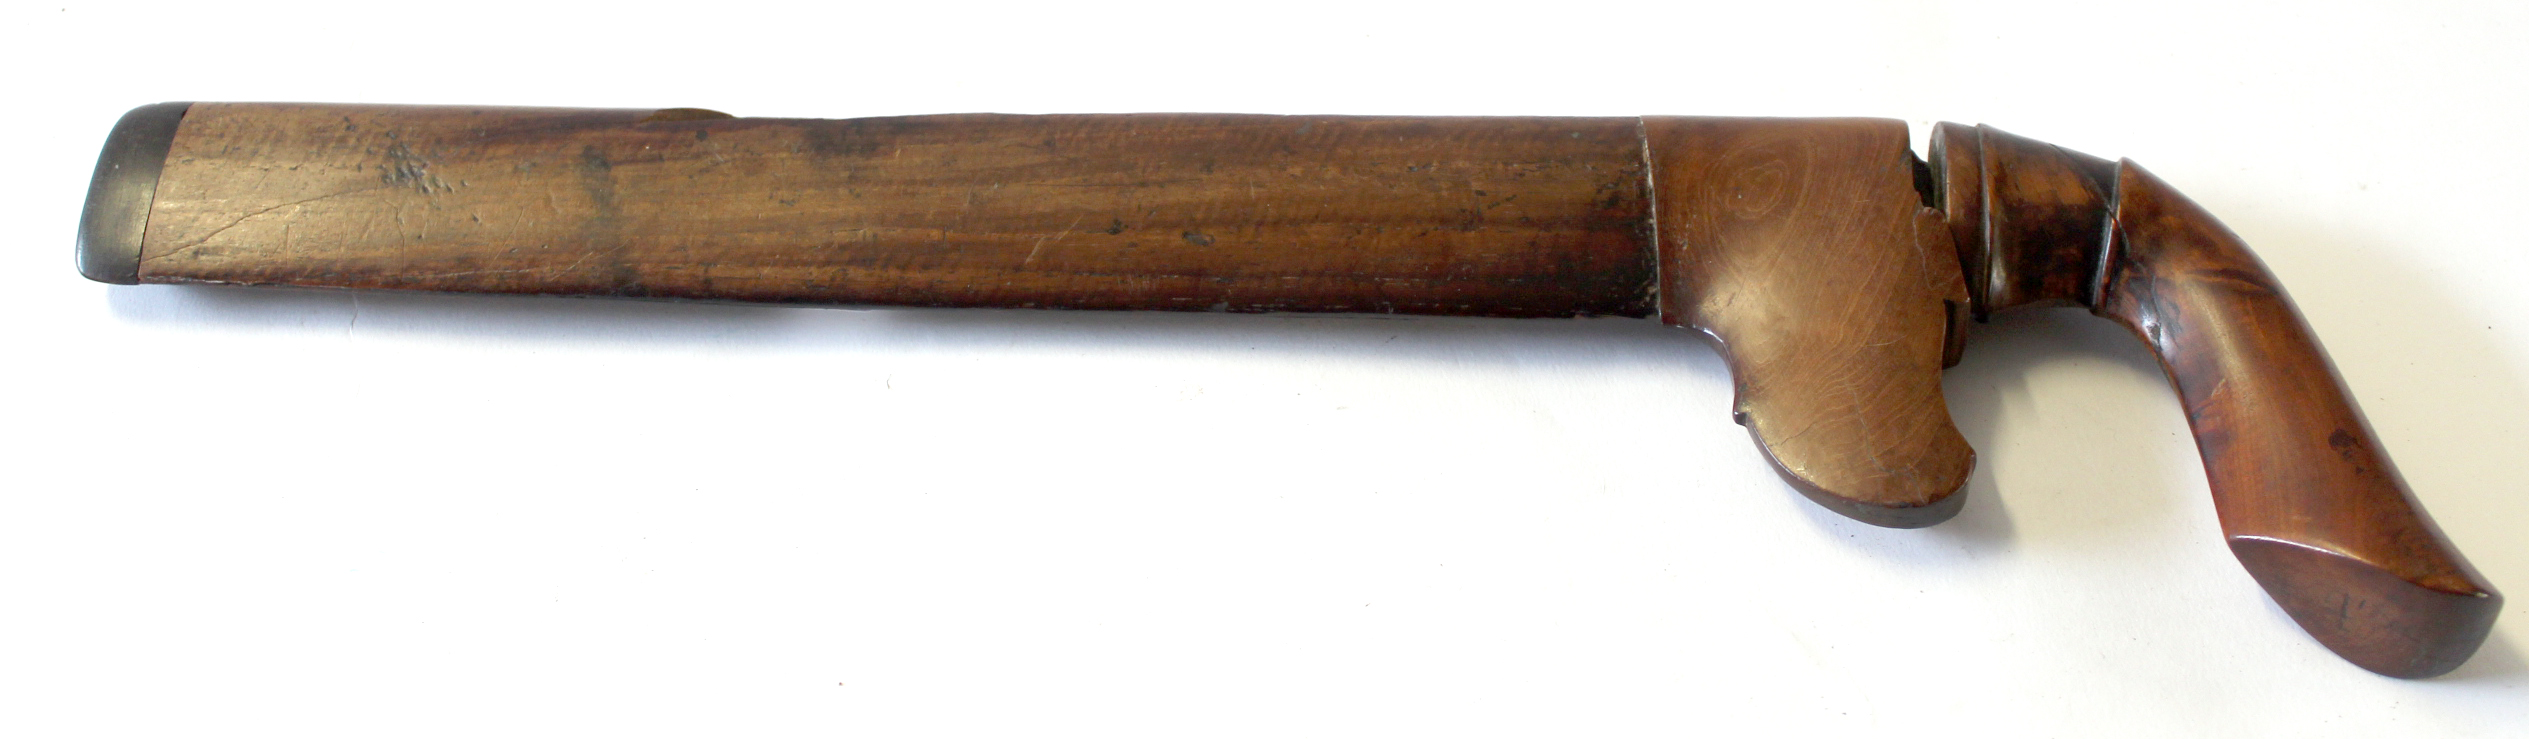 Three various pistol grip wooden sheathed knives, longest blade length approx 33cm - Image 8 of 14